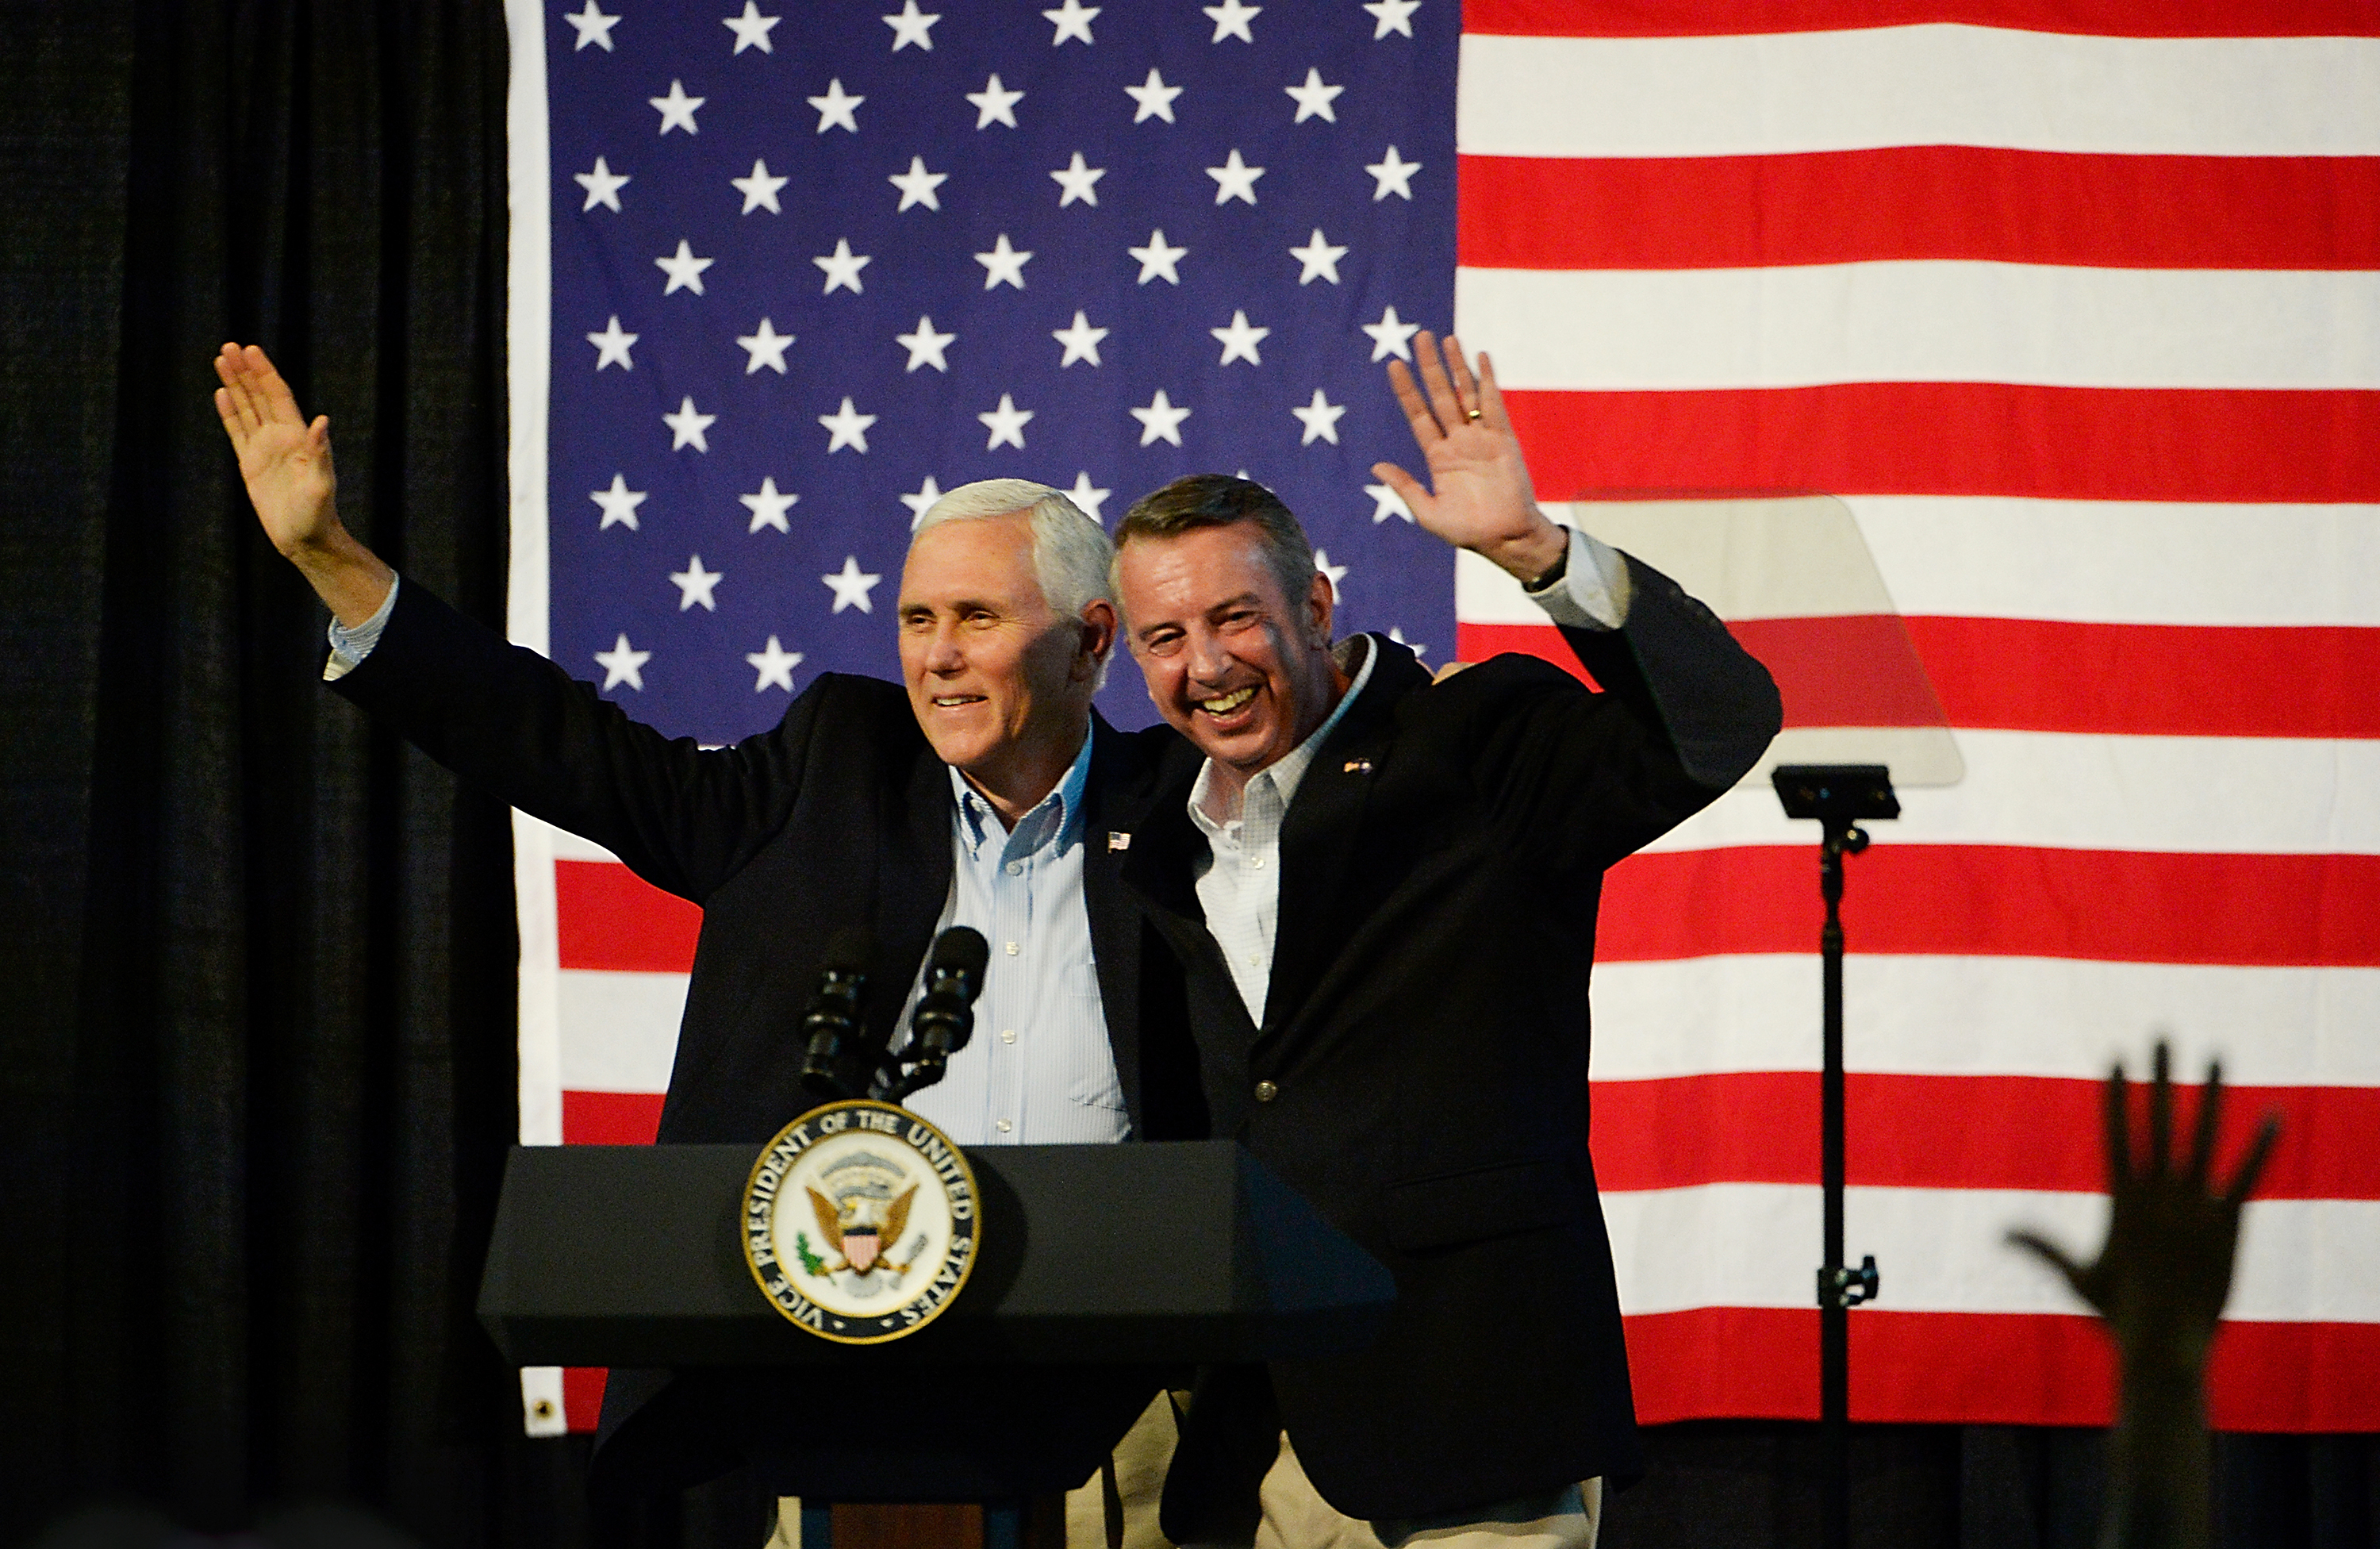 Vice President Pence and Virginia&#039;s Republican gubernatorial candidate Ed Gillespie.